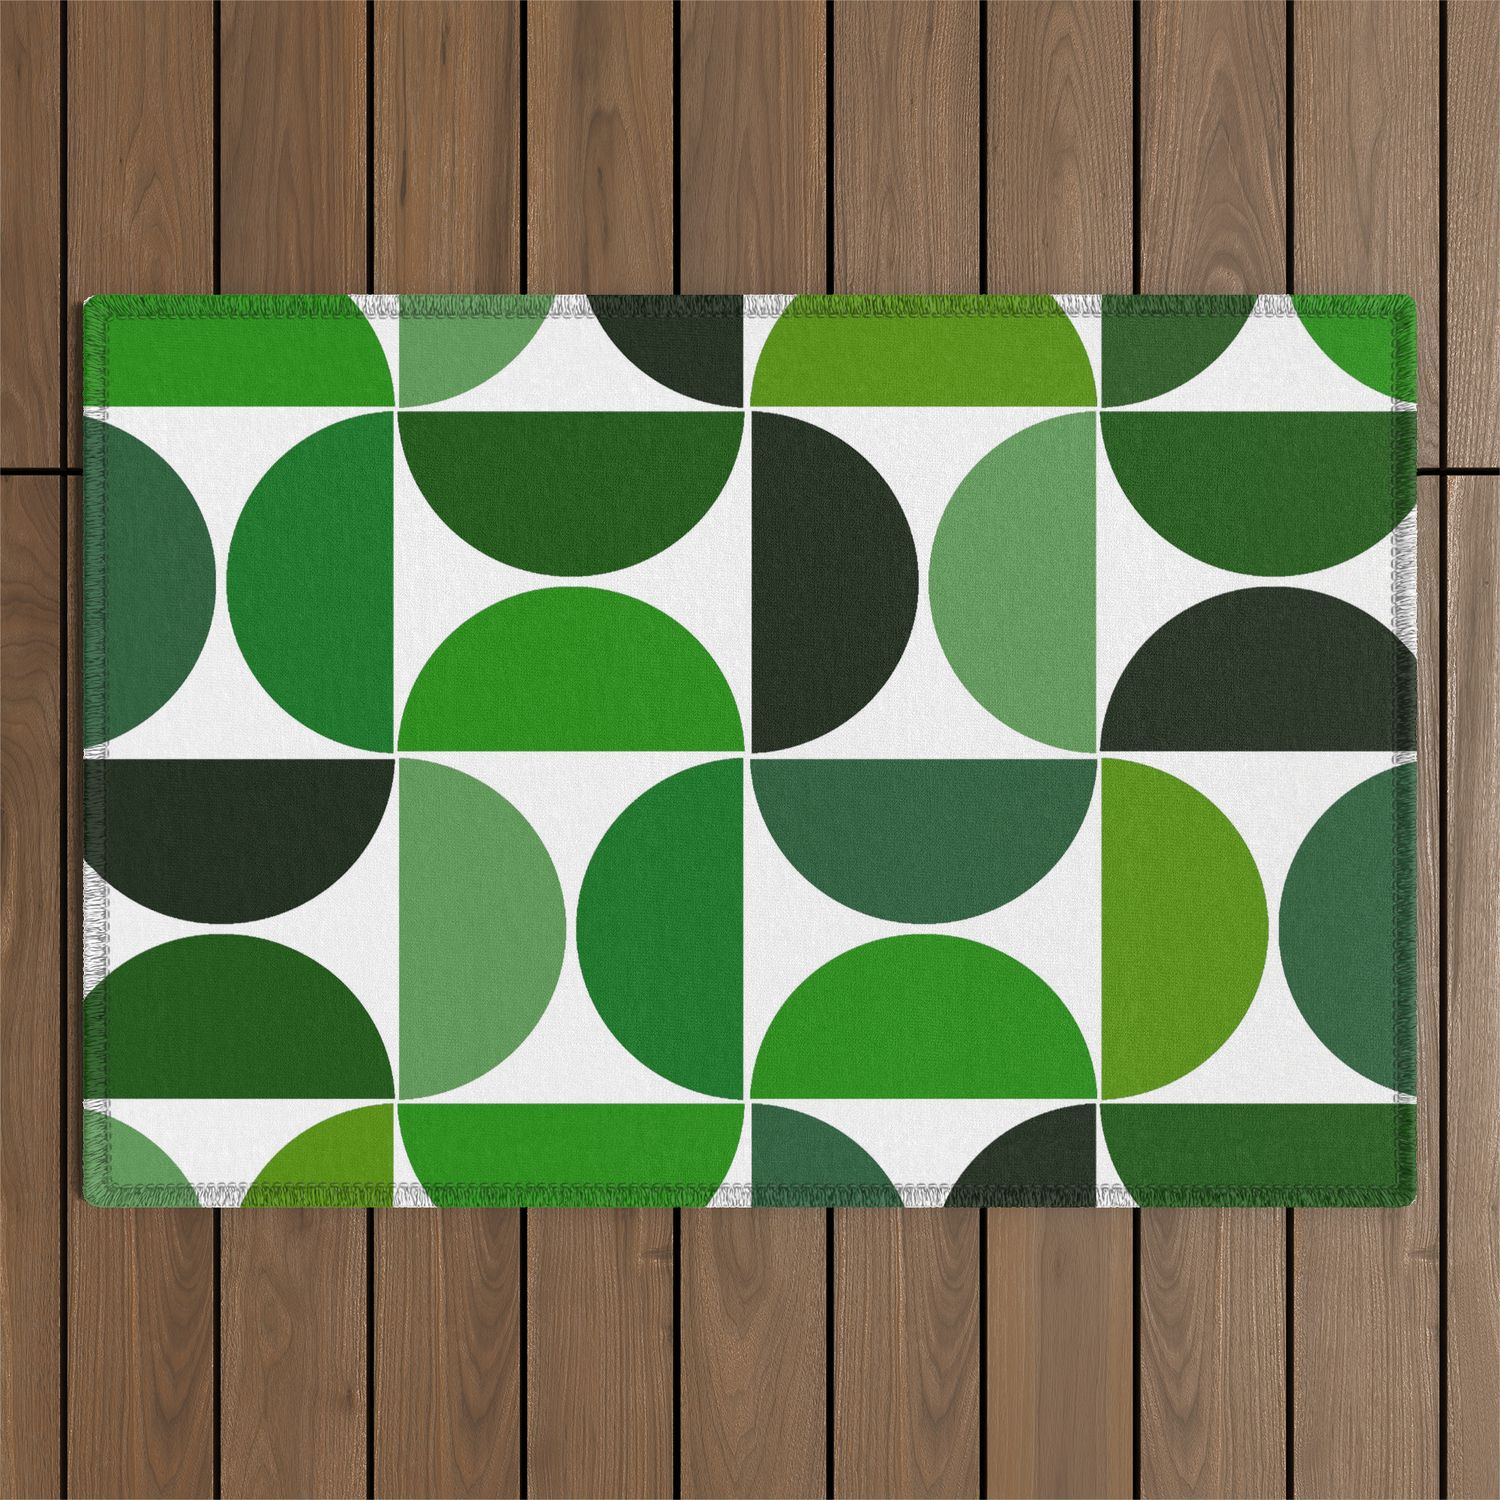 Mid Century Modern Geometric Green Outdoor Rugartstudio88Design |  Society6 Intended For Green Outdoor Rugs (Photo 7 of 15)